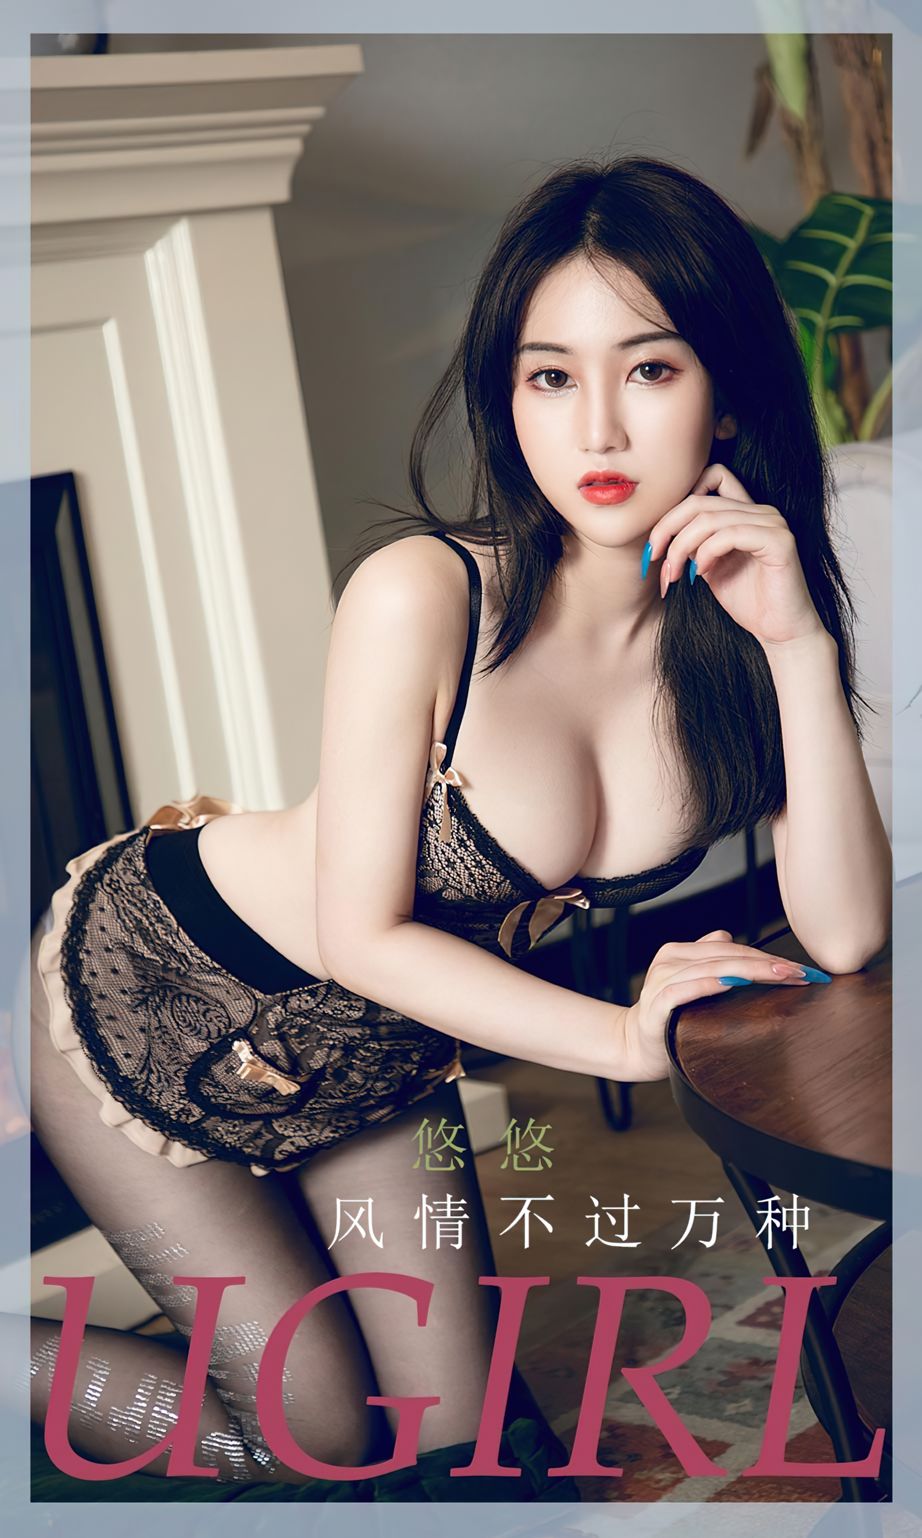 Ugirls App Vol. 2239 There are only ten thousand kinds of customs